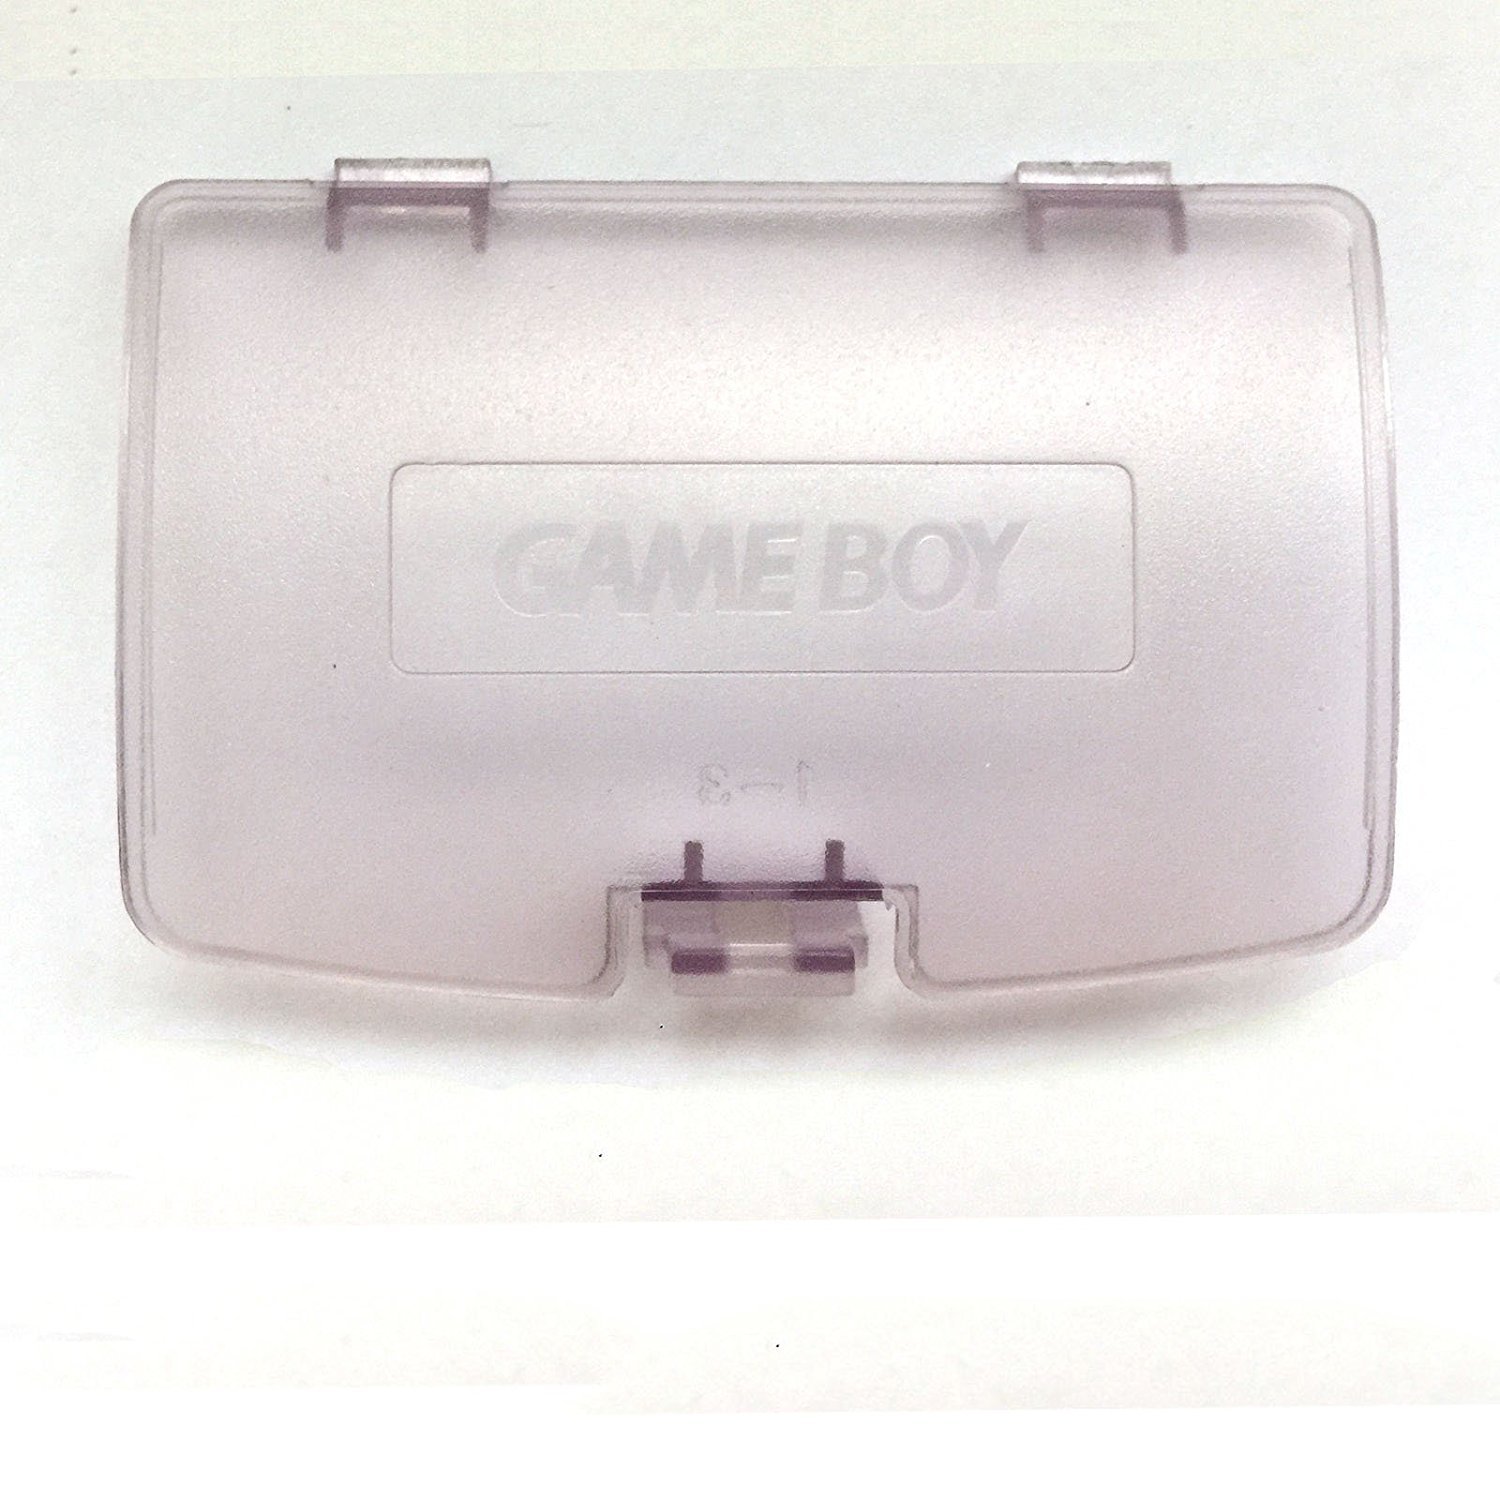 Battery Back Door Cover Case for Gameboy Color GBC Game Boy Color Replaceme Clear Purple